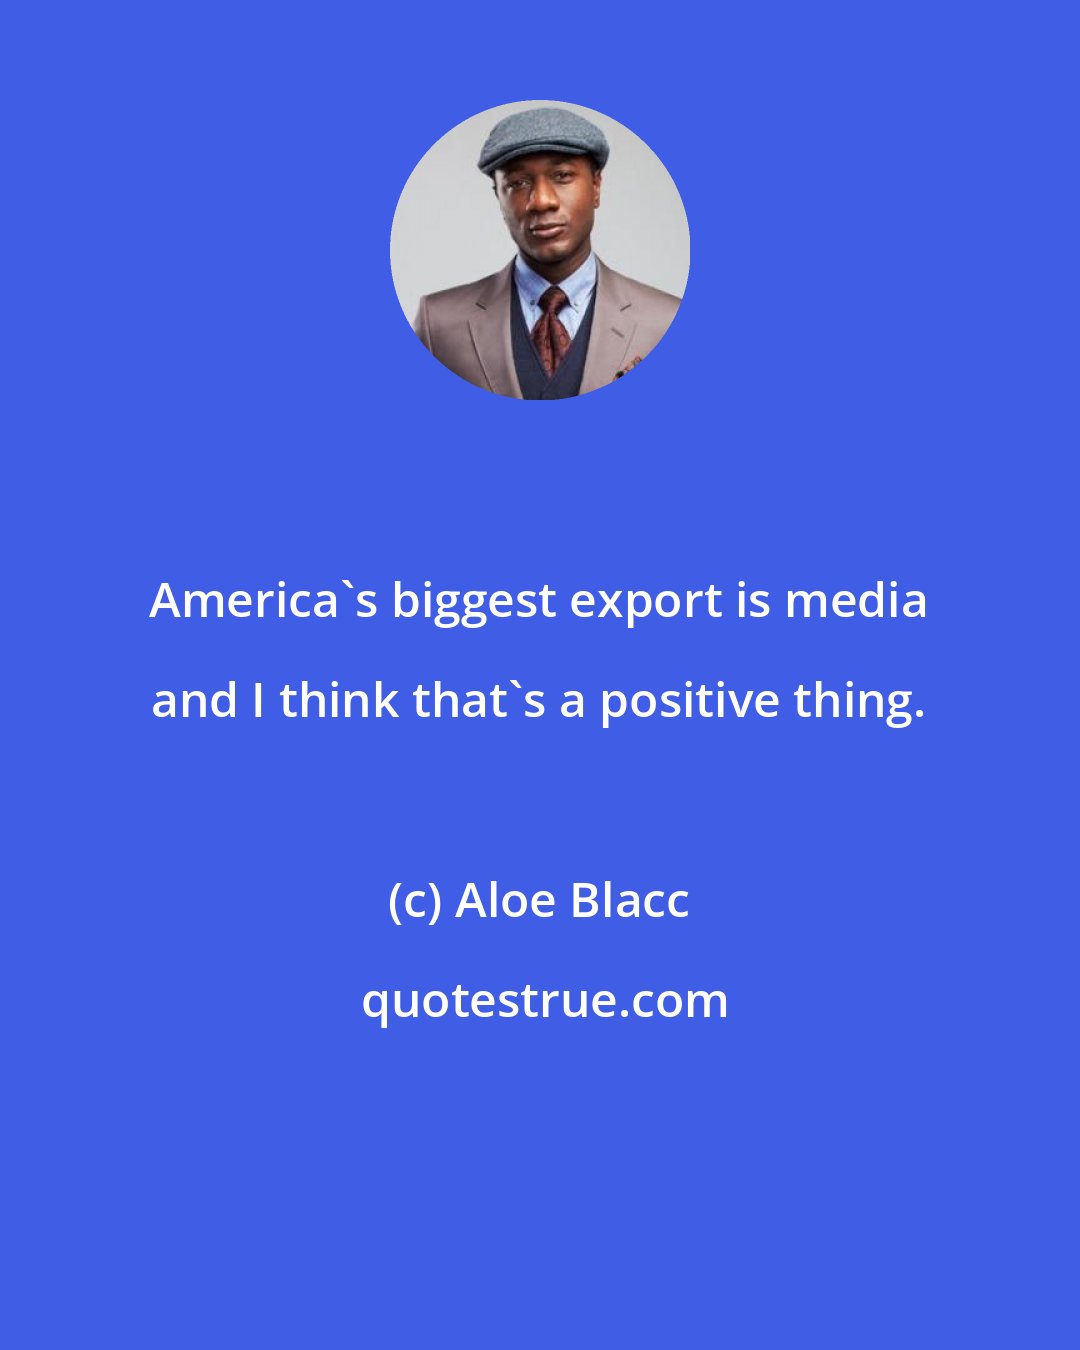 Aloe Blacc: America's biggest export is media and I think that's a positive thing.